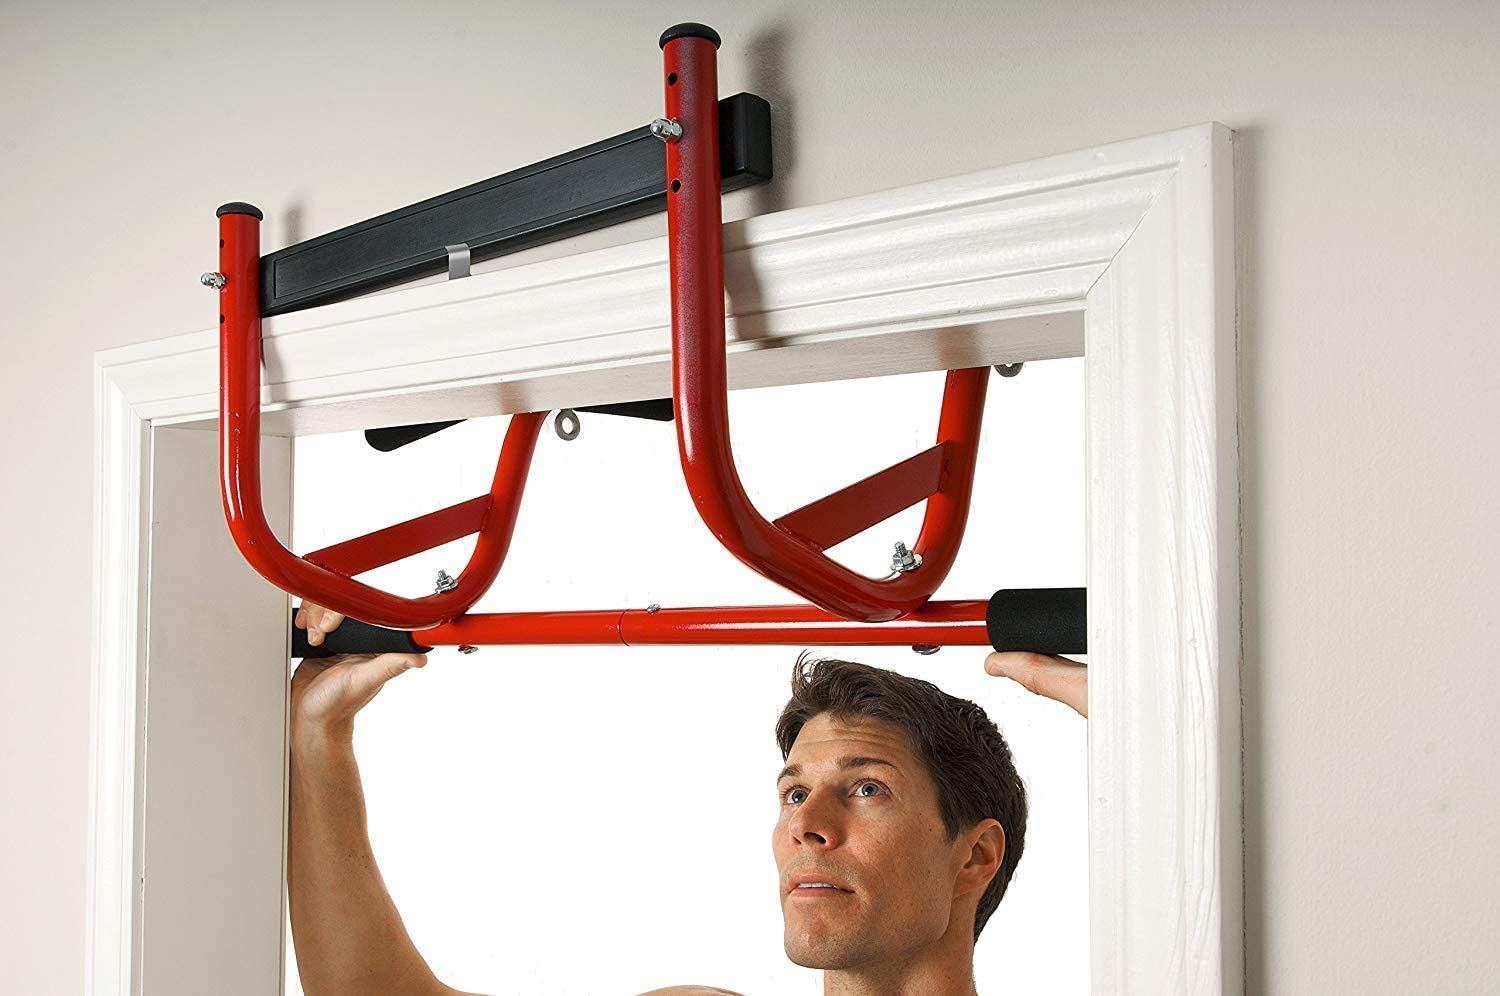 GoFit Elevated Chin Up Station in use door